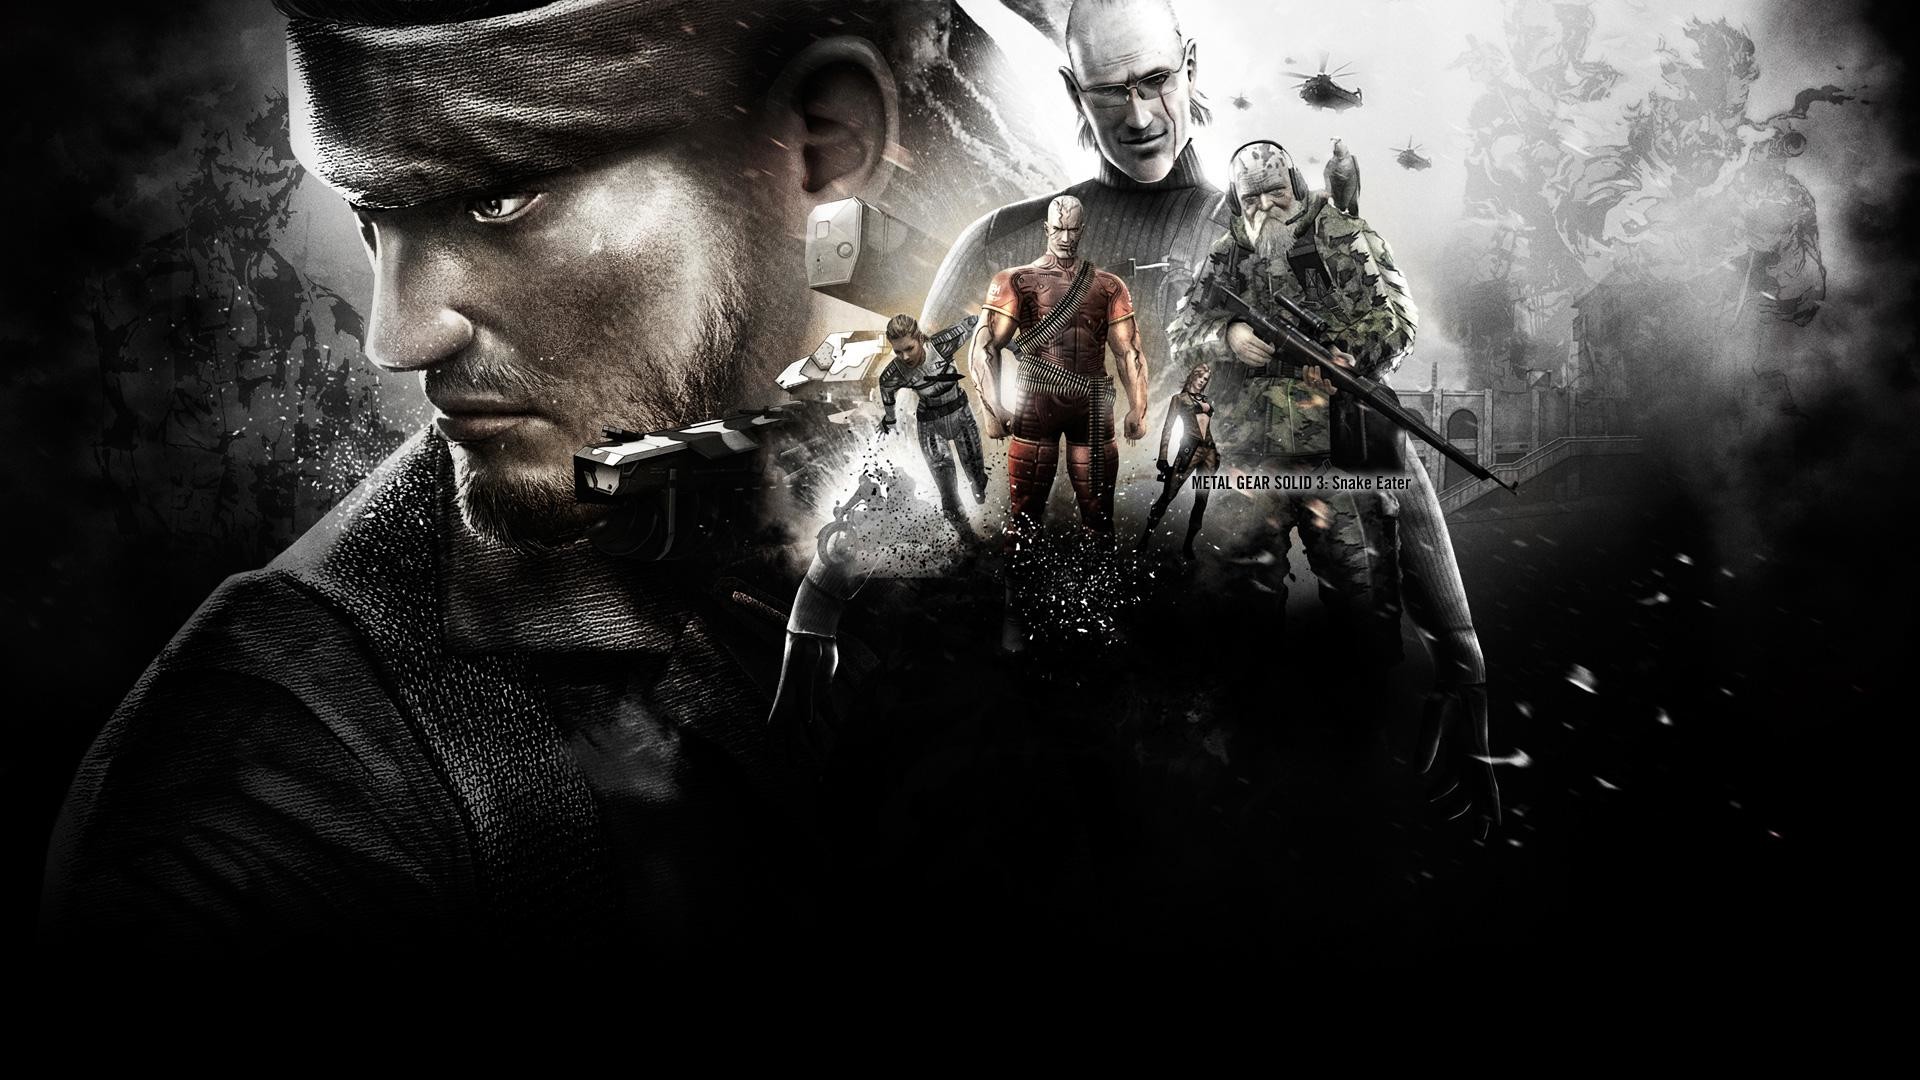 1920x1080 Mgs 3 Wallpapers - Wallpaper Cave